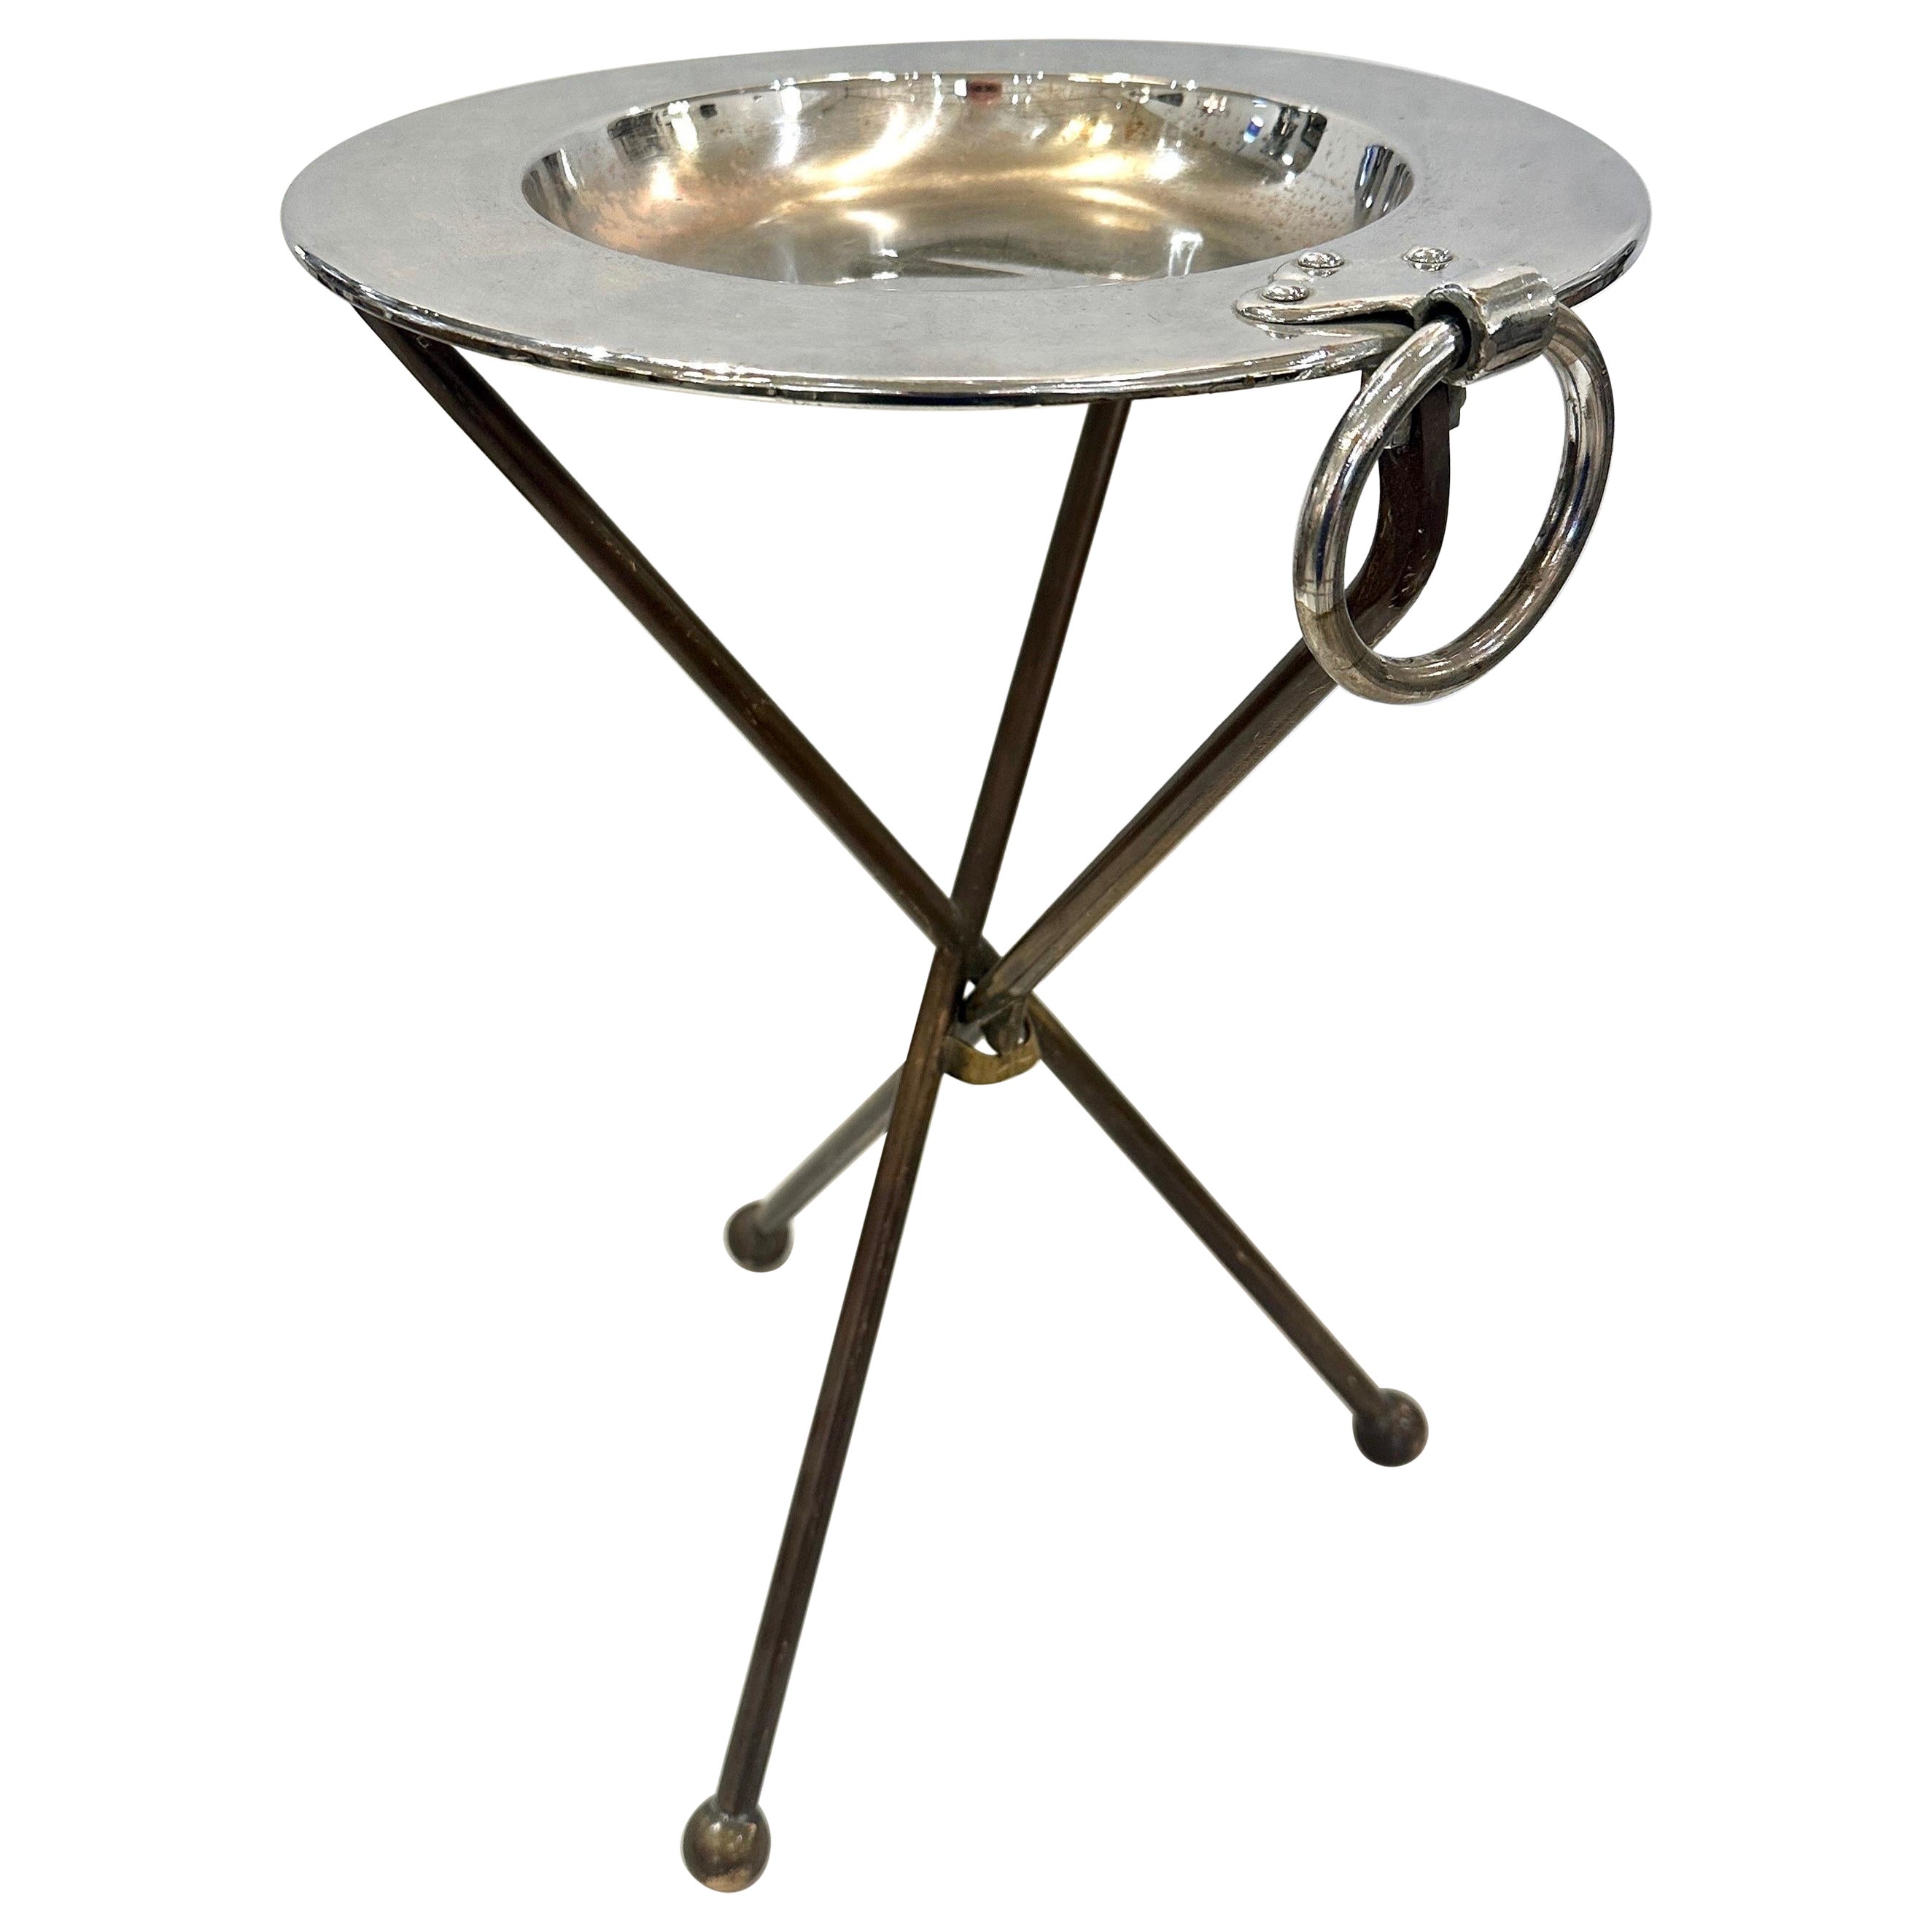 Neoclassical Style Brass & Nickeled Metal Guéridon / Collapsing Side Table For Sale